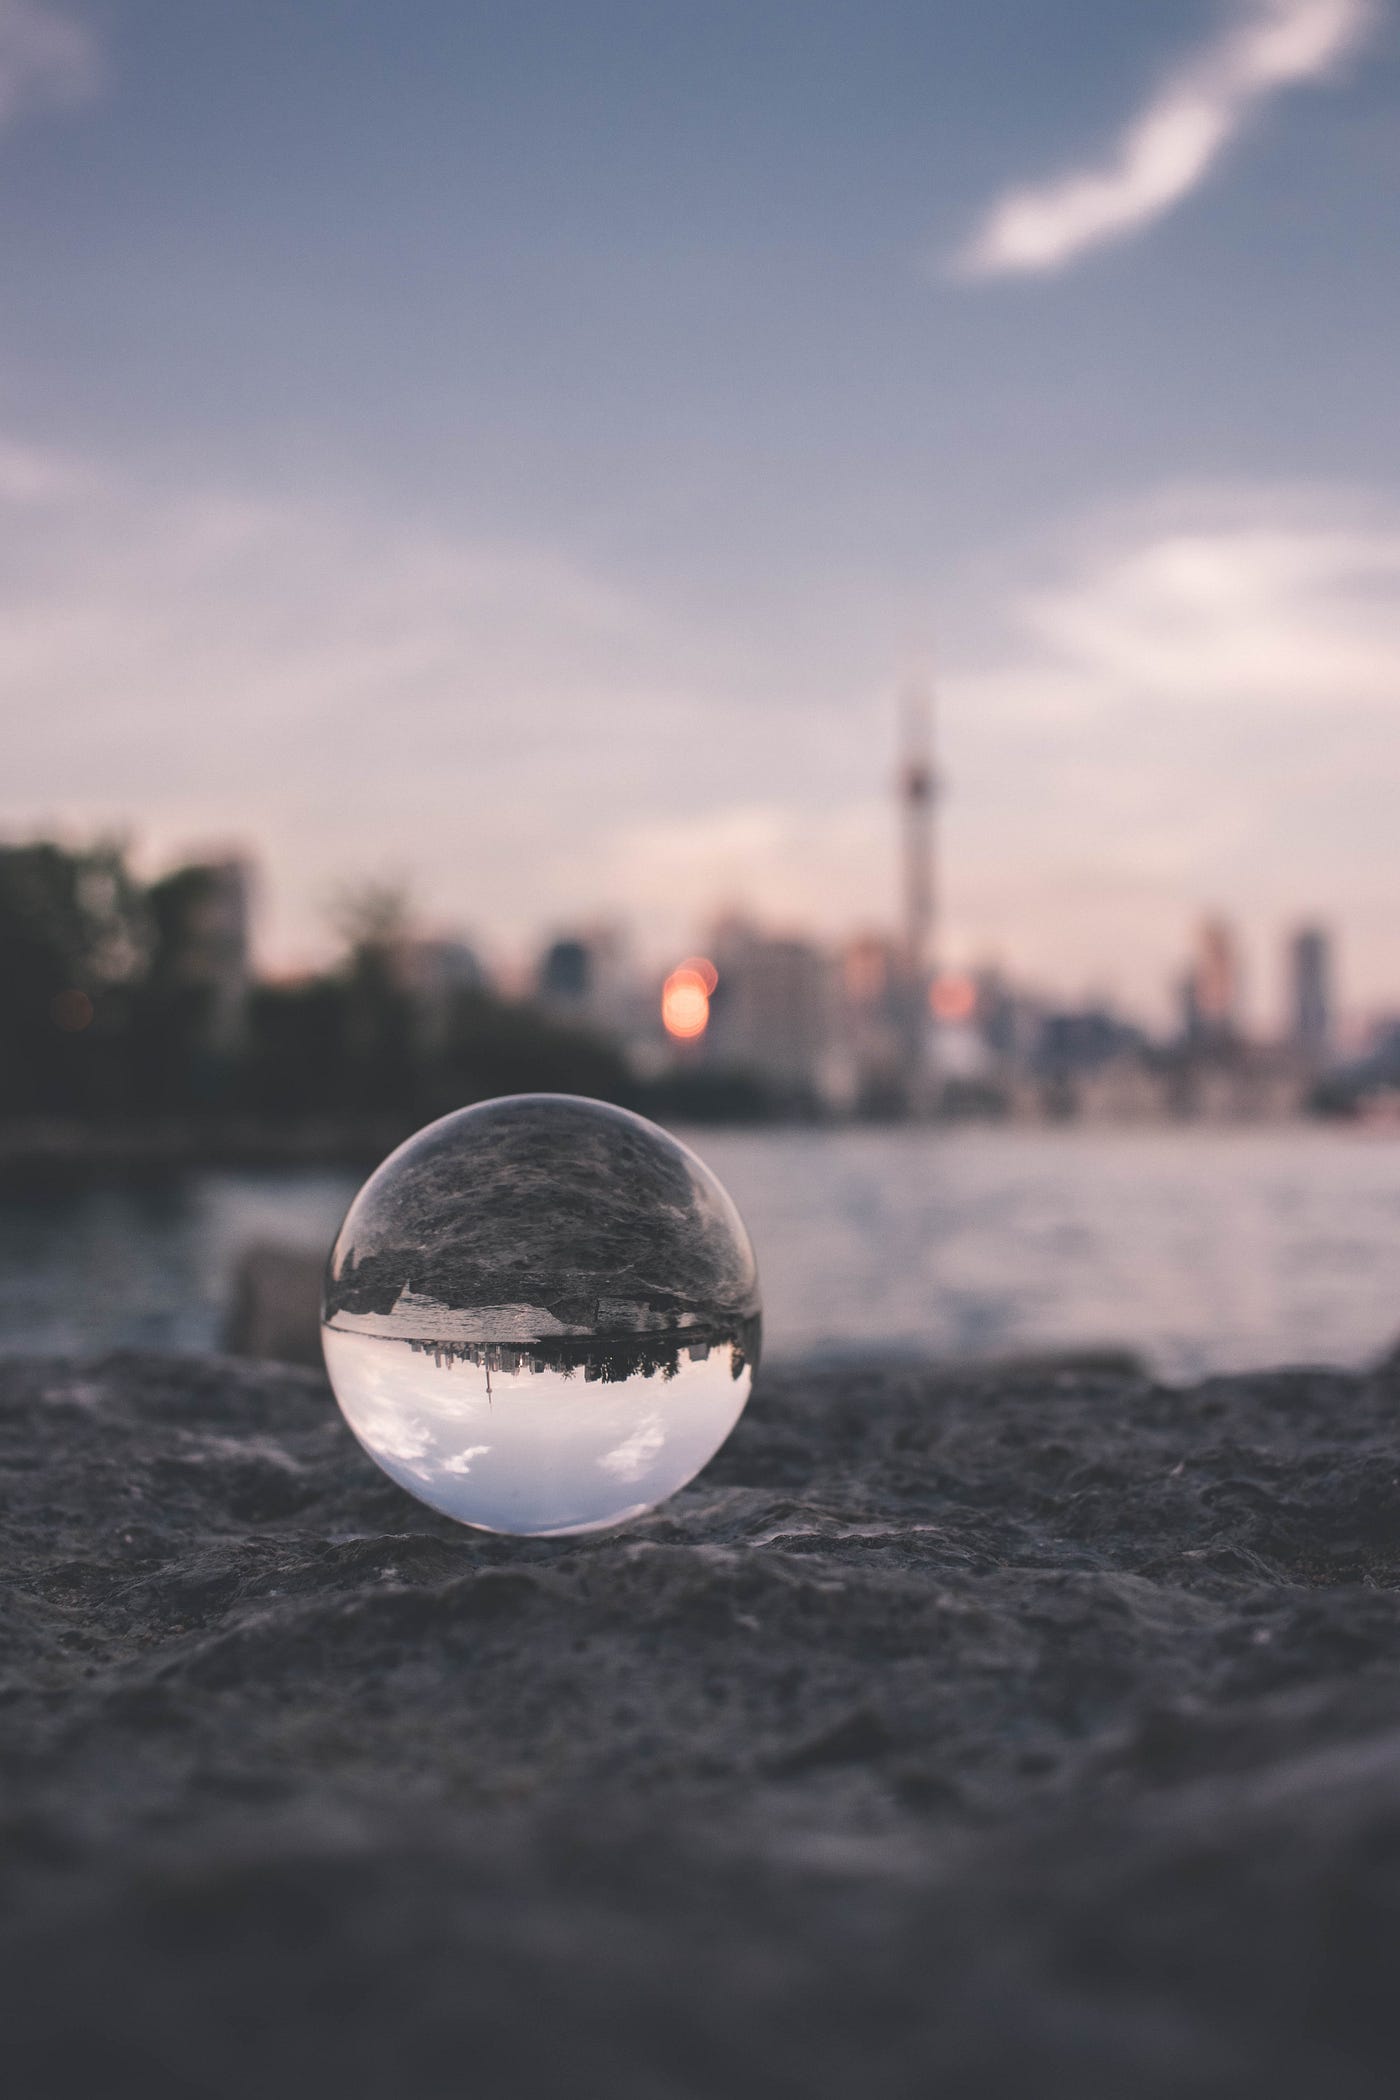 A lens bubble reflecting a city to show an introvert point of view